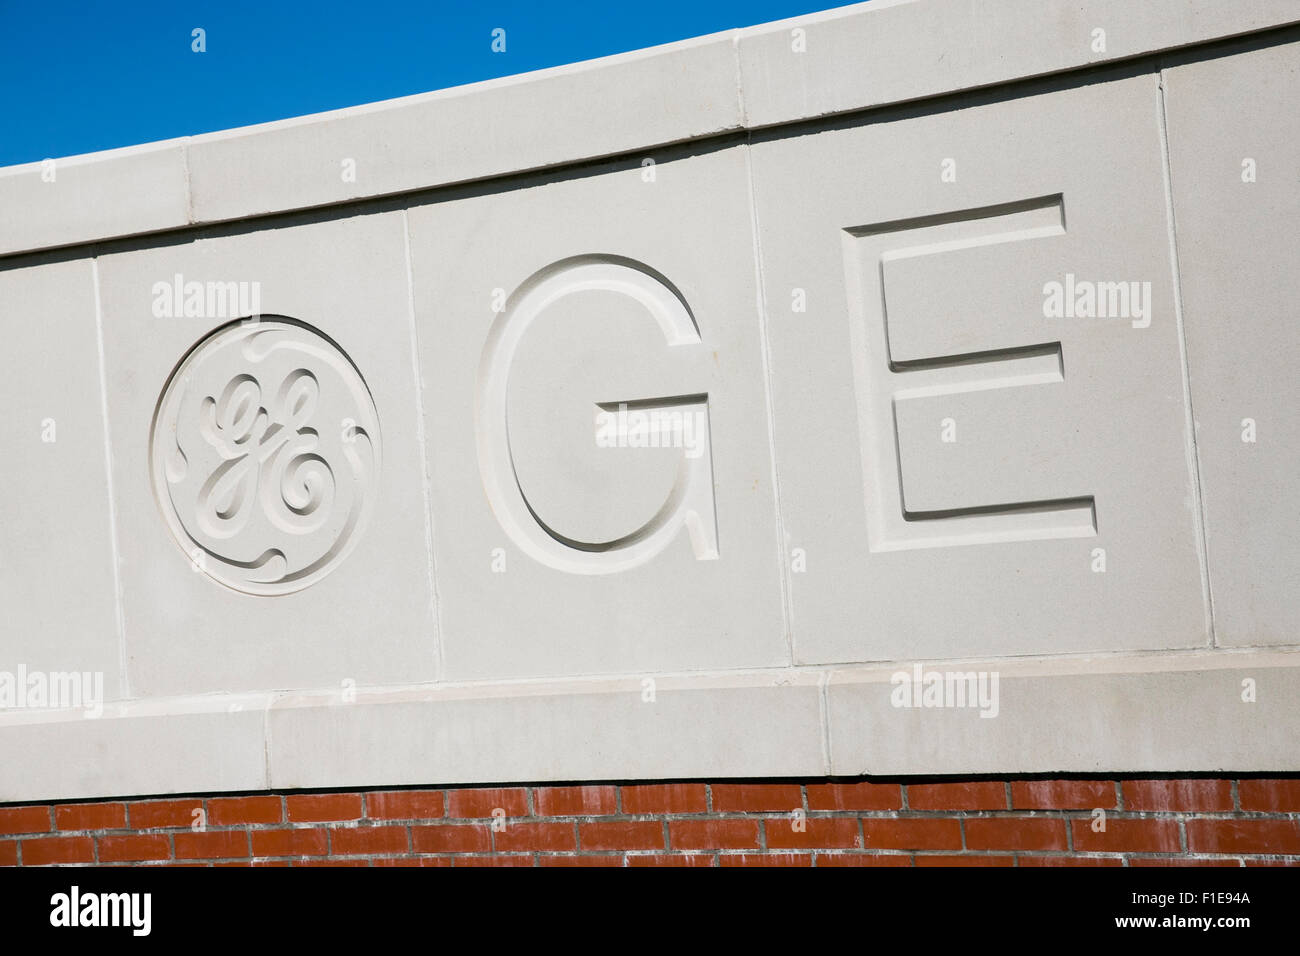 A logo sign outside of the General Electric (GE) Appliance Park manufacturing facility in Louisville, Kentucky on August 25, 201 Stock Photo